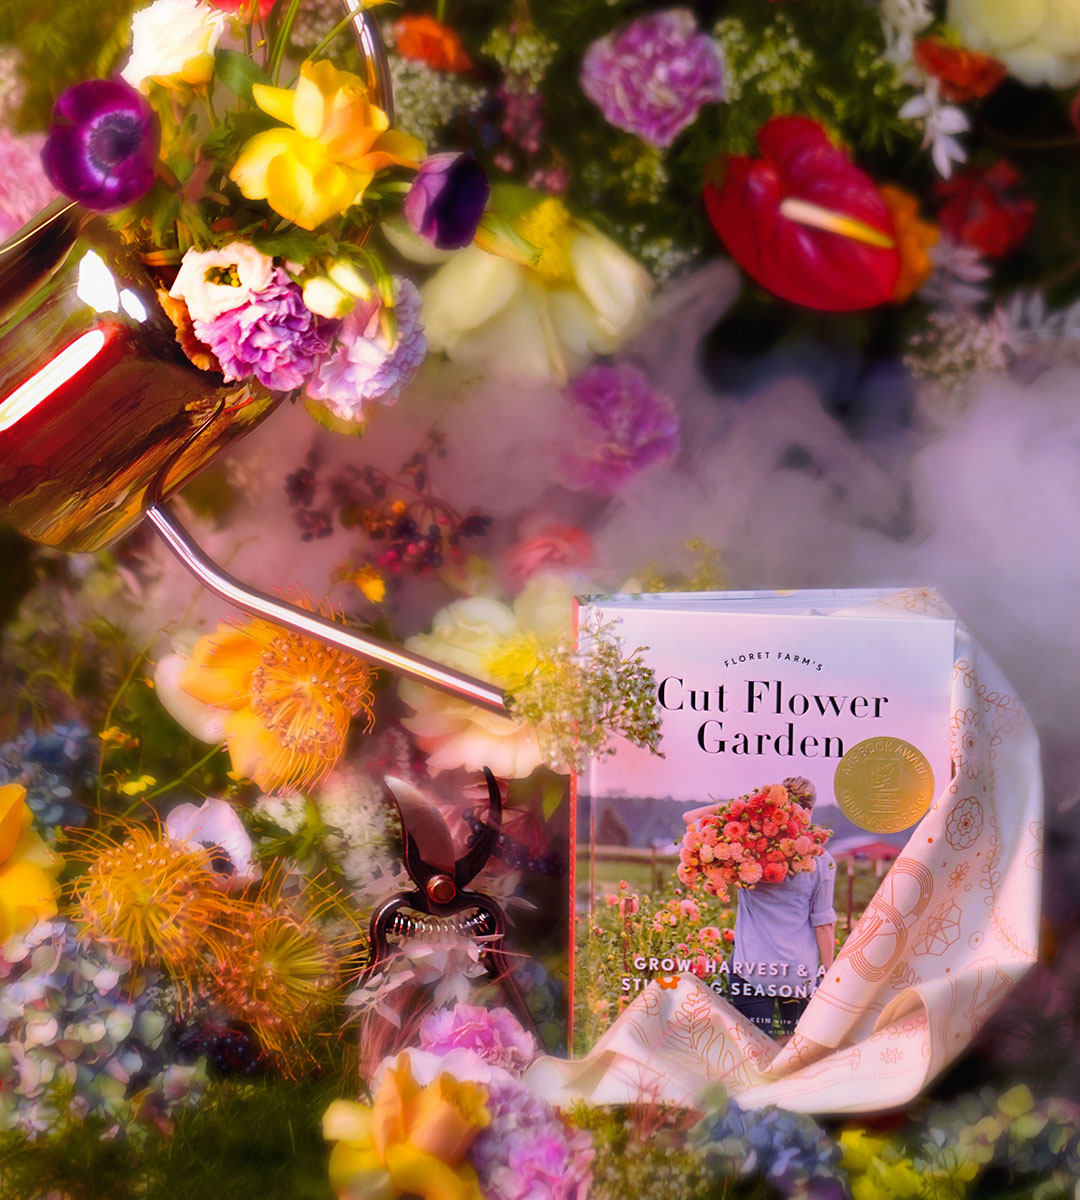 A gorgeous fairy floral backdrop features a copper watering can pantomiming pouring from the corner of the picture. A tan Asrai Garden bandana flows out of the Floret Farms Cut Flower Garden book while the barebones pruners stand center photo.